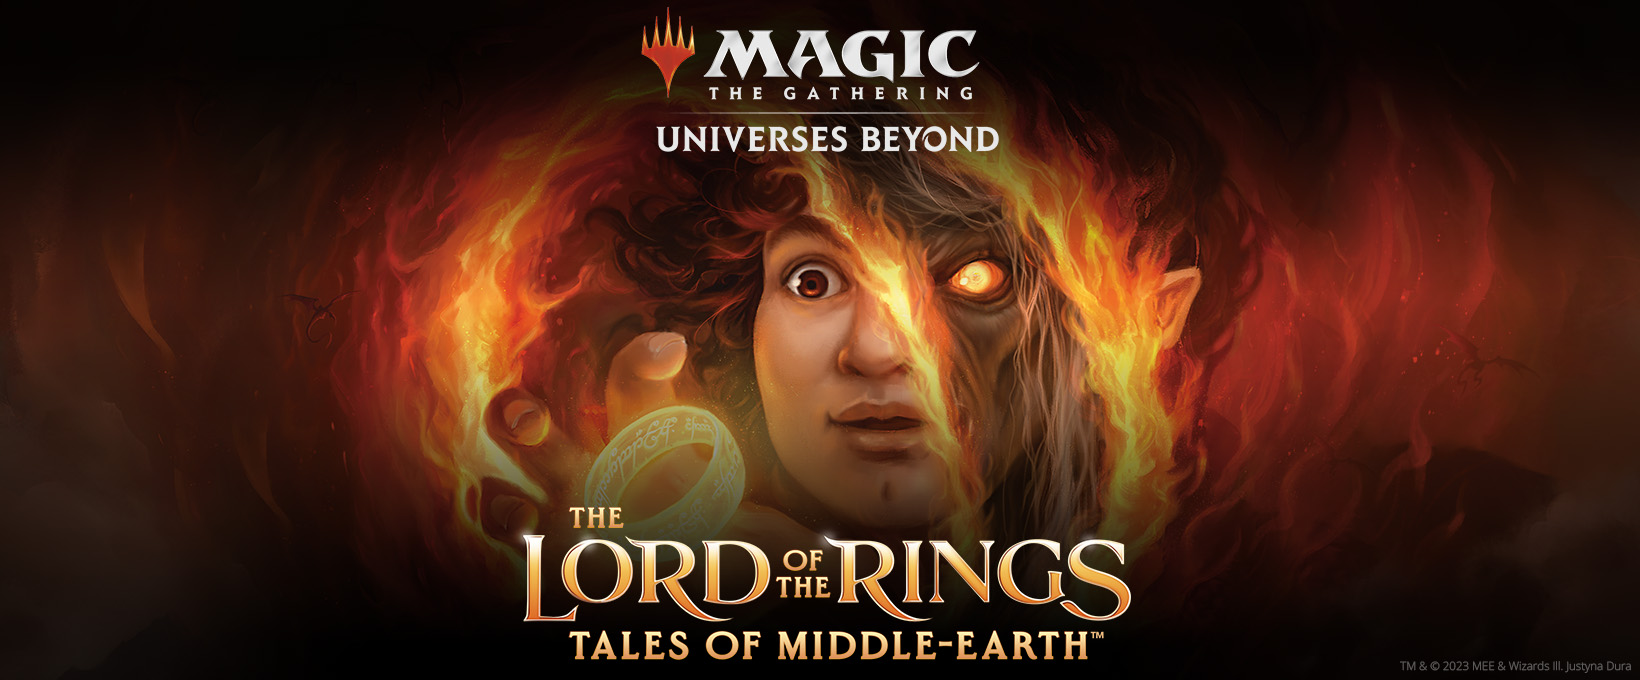 The Lord of the Rings: Tales of Middle-Earth™